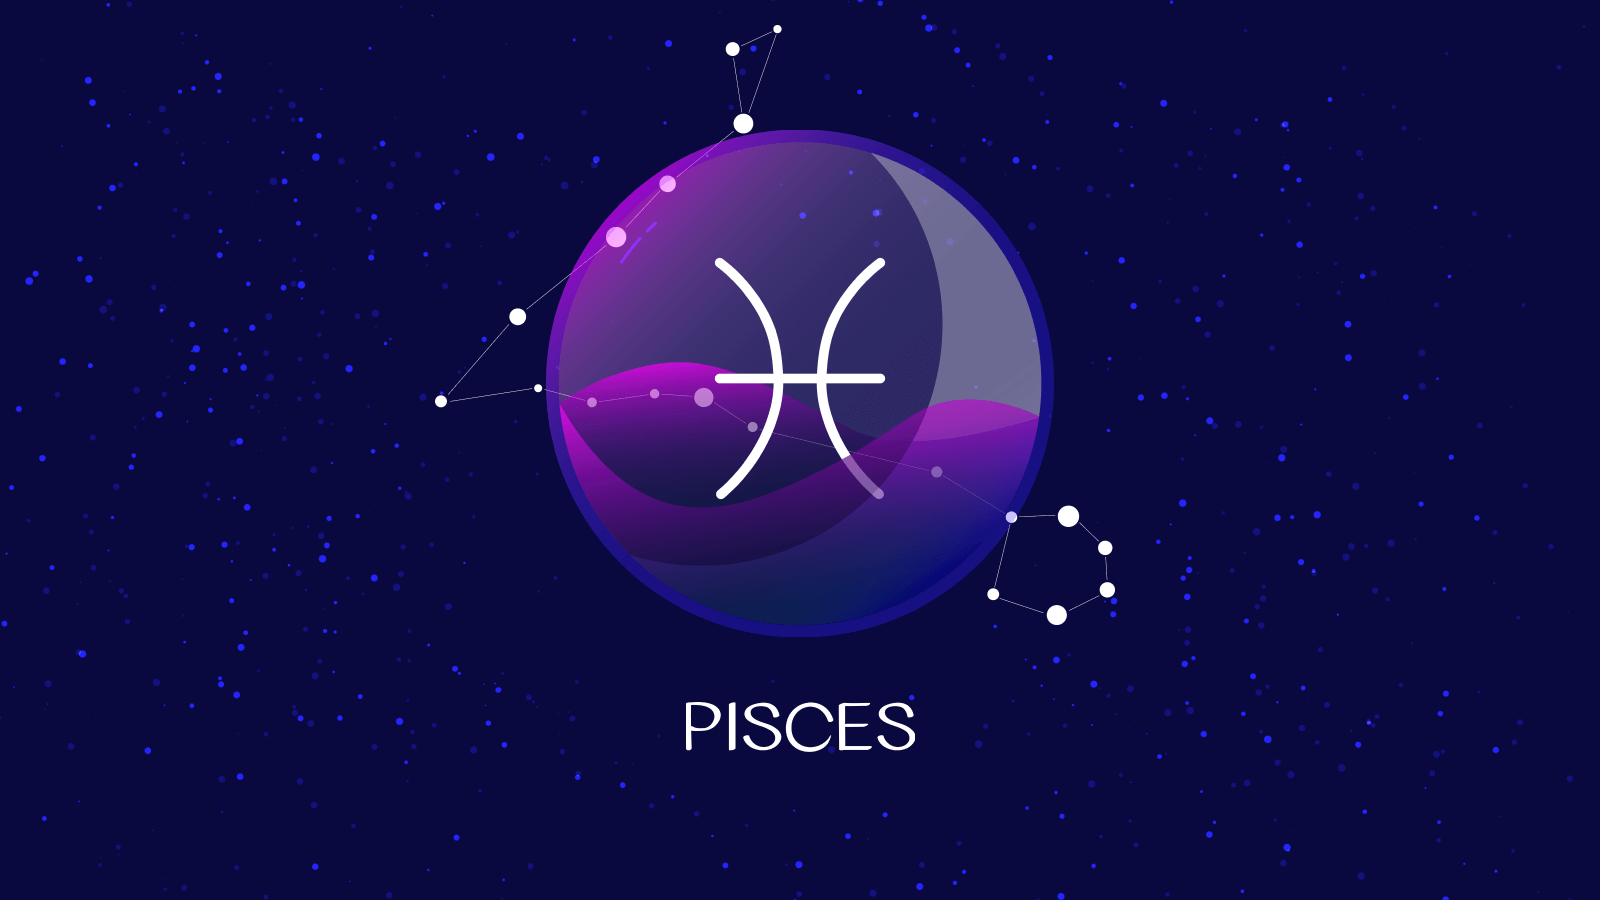 A graphic of the zodiac sign of Pisces - Pisces